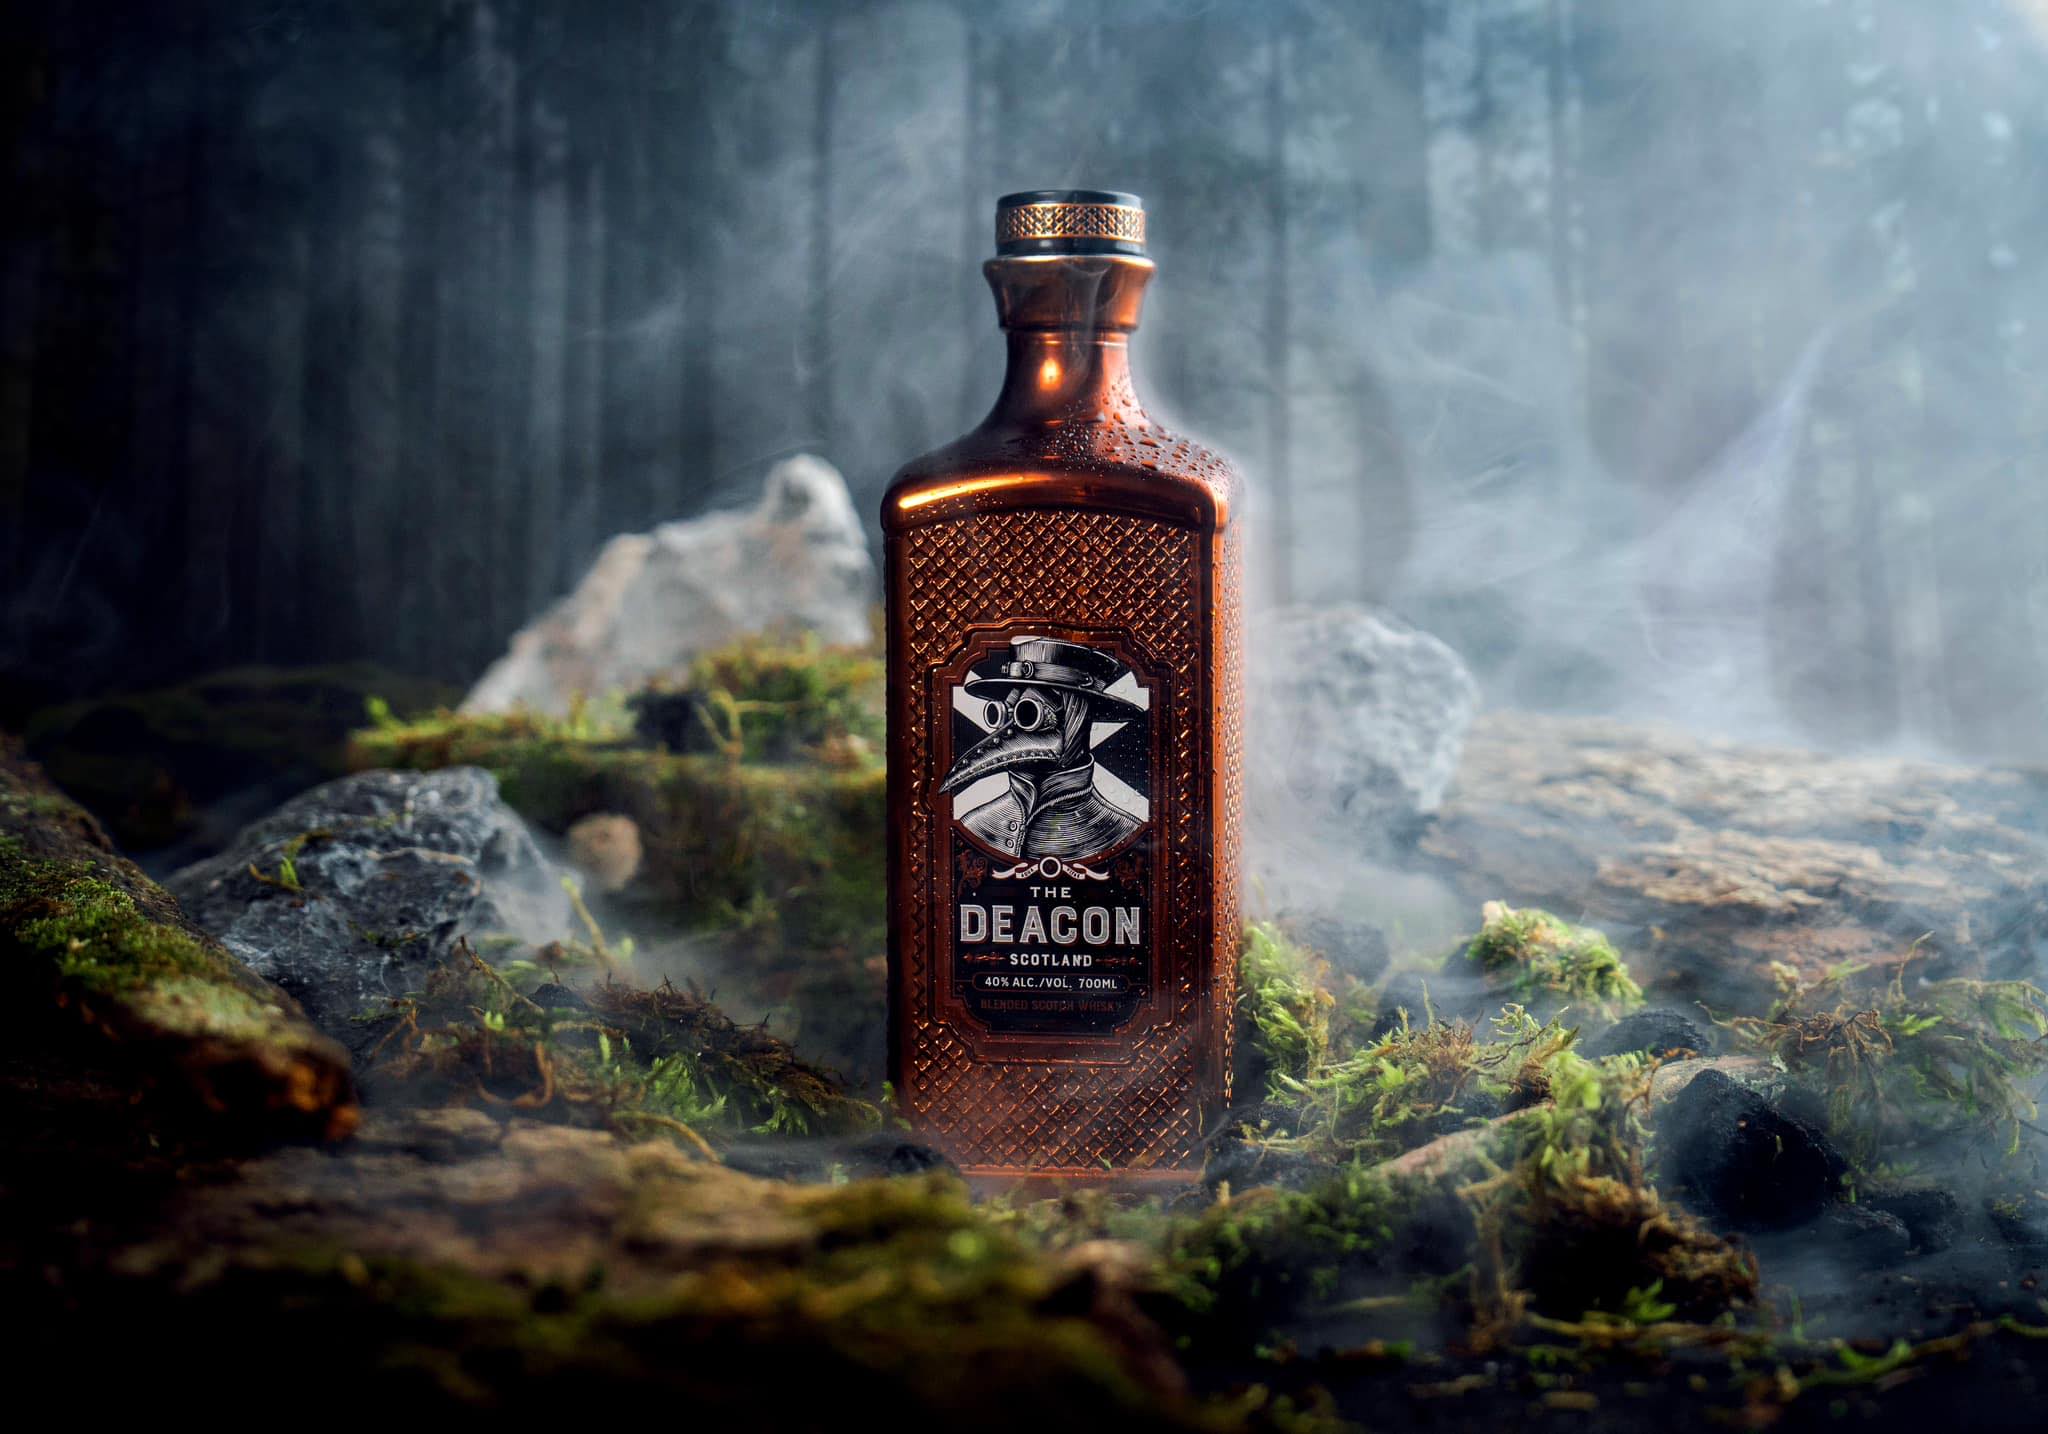 (An advertising shot for new blend The Deacon) Set alongside Chivas Regal's own range, the Deacon blend is an intriguing new entry at the $40 range